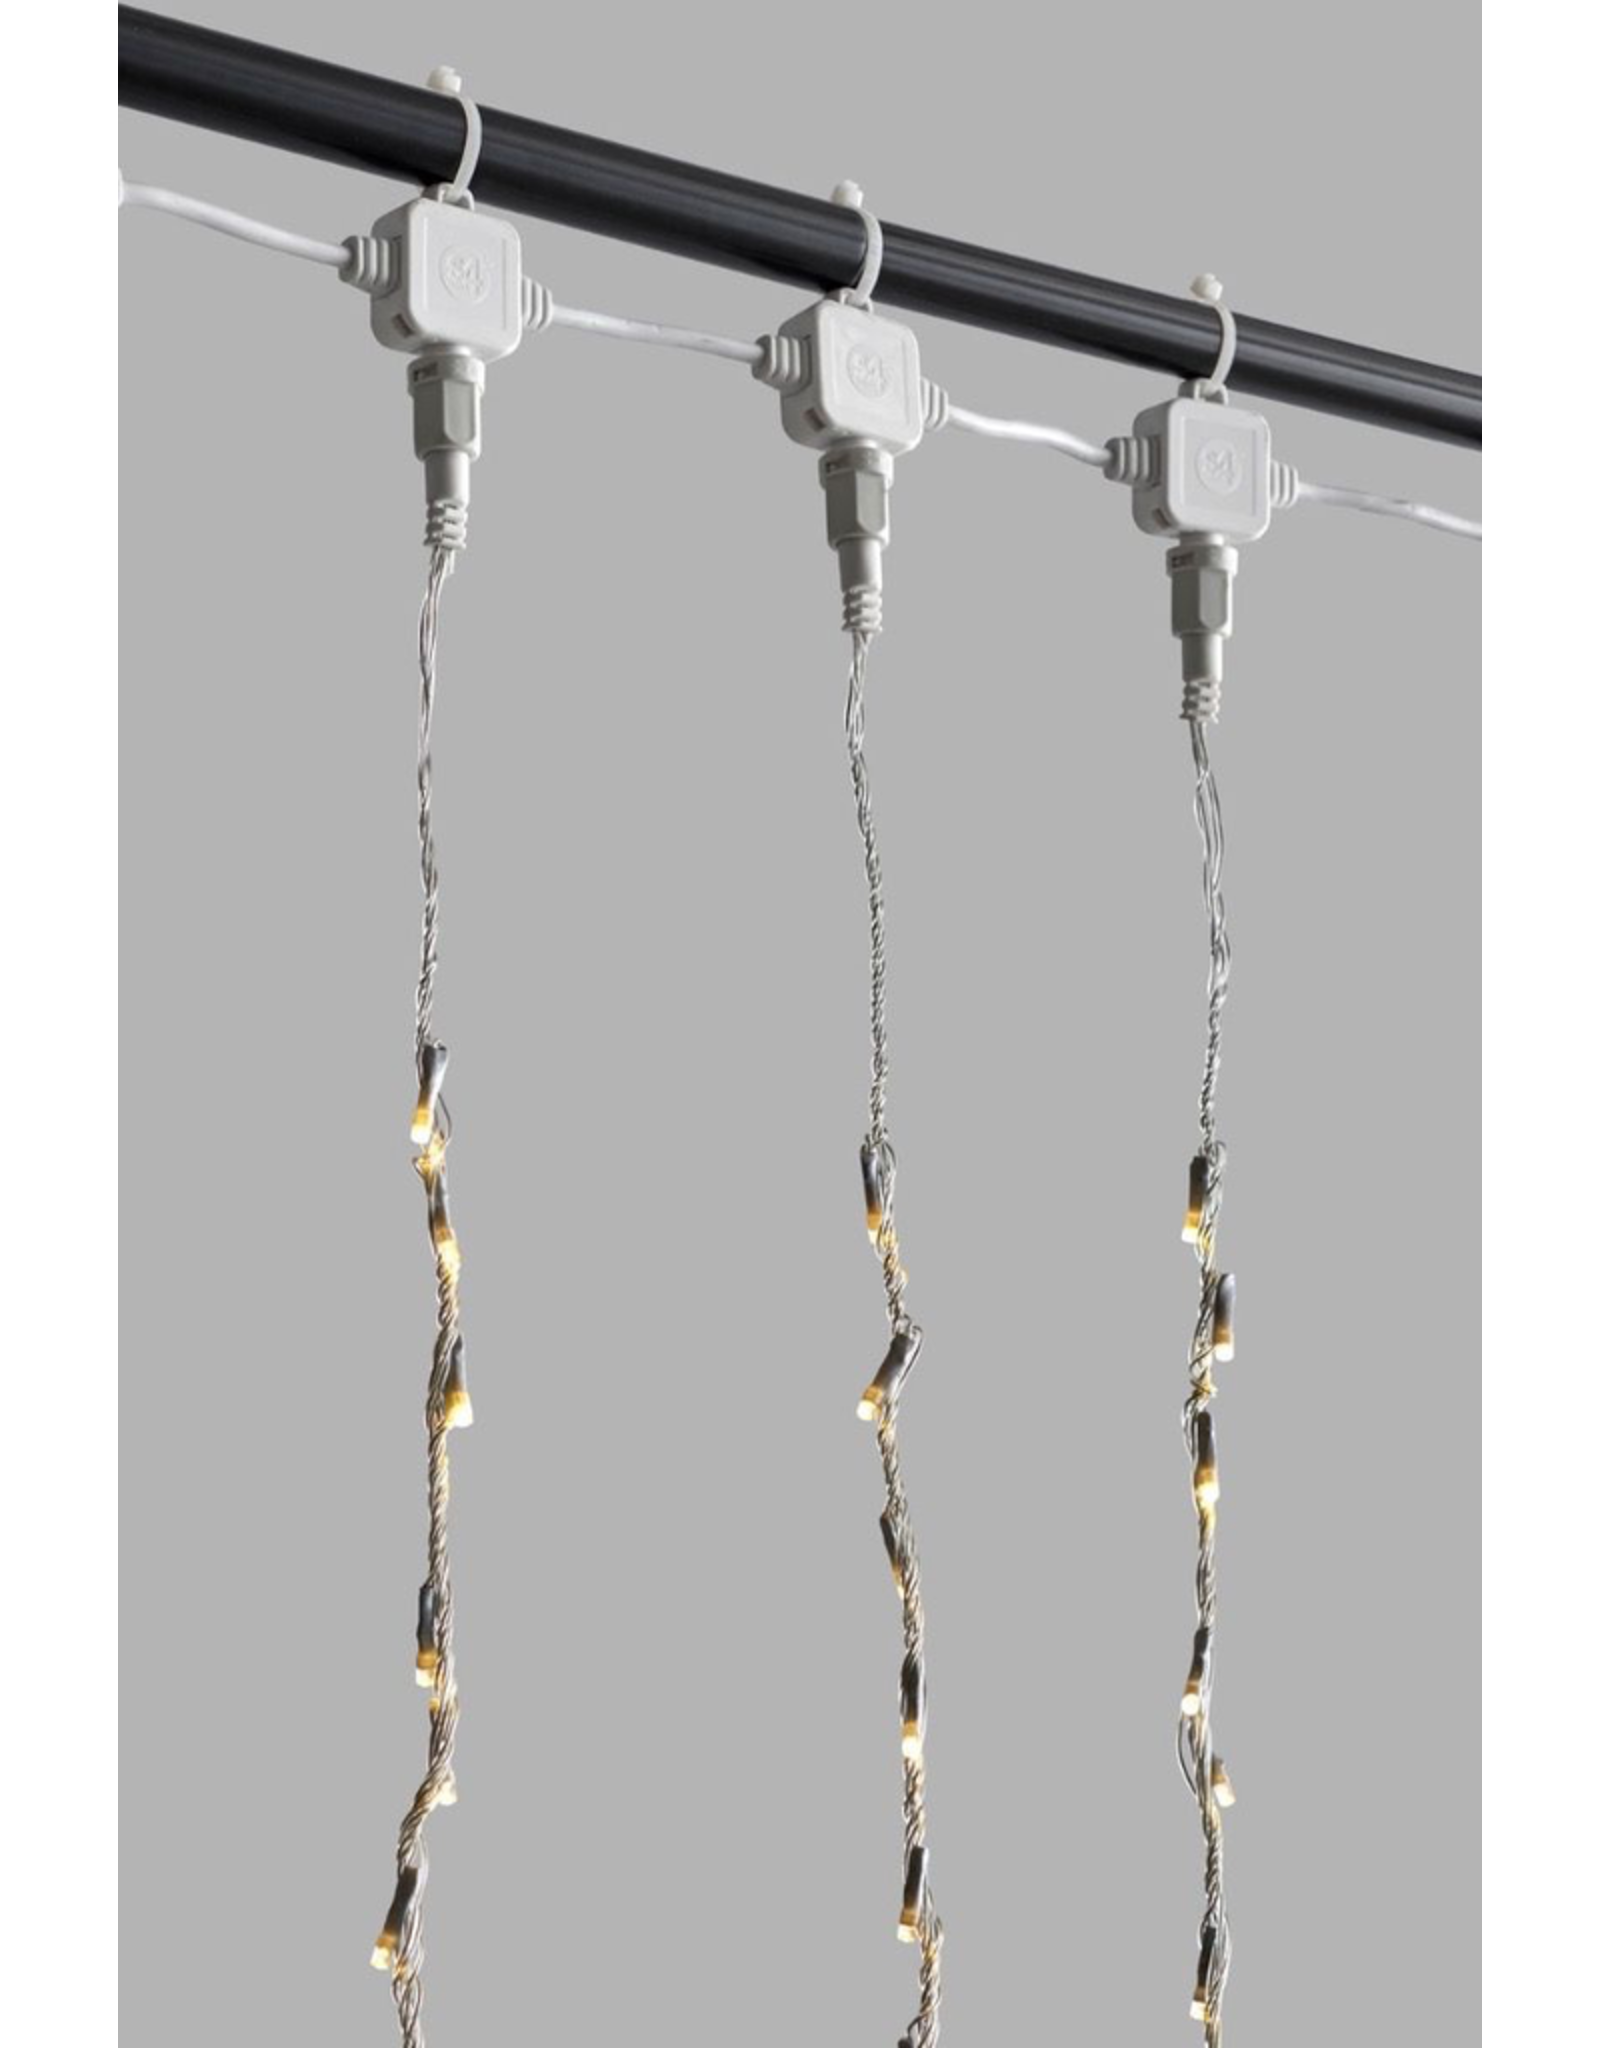 Digital Curtain Light Strand 48 LEDs Warm White Clear Wire